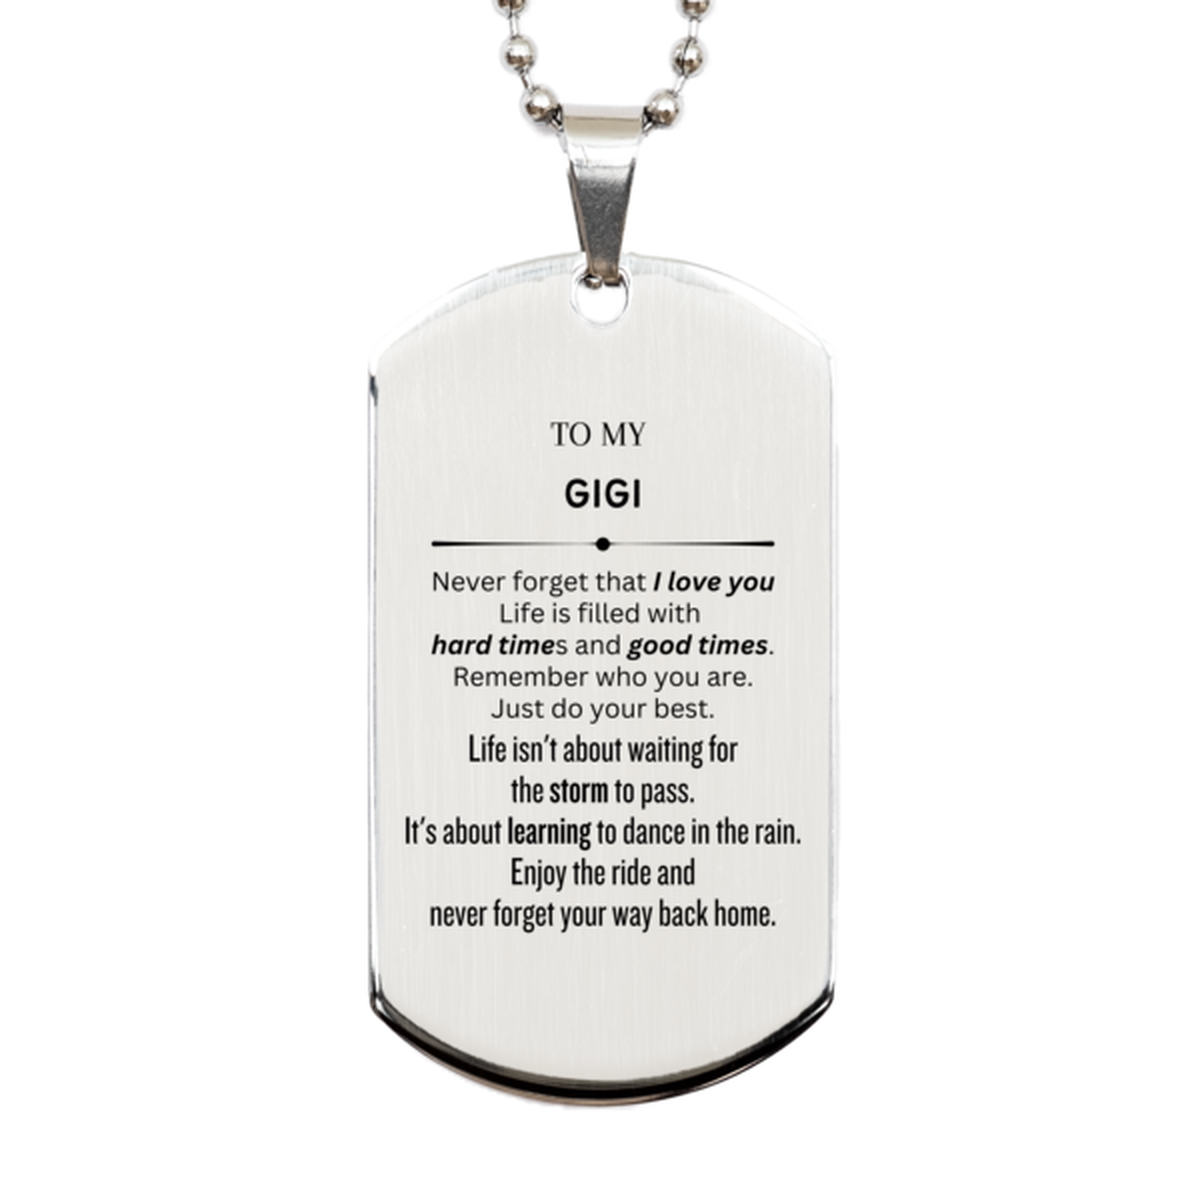 Christmas Gigi Silver Dog Tag Gifts, To My Gigi Birthday Thank You Gifts For Gigi, Graduation Unique Gifts For Gigi To My Gigi Never forget that I love you life is filled with hard times and good times. Remember who you are. Just do your best